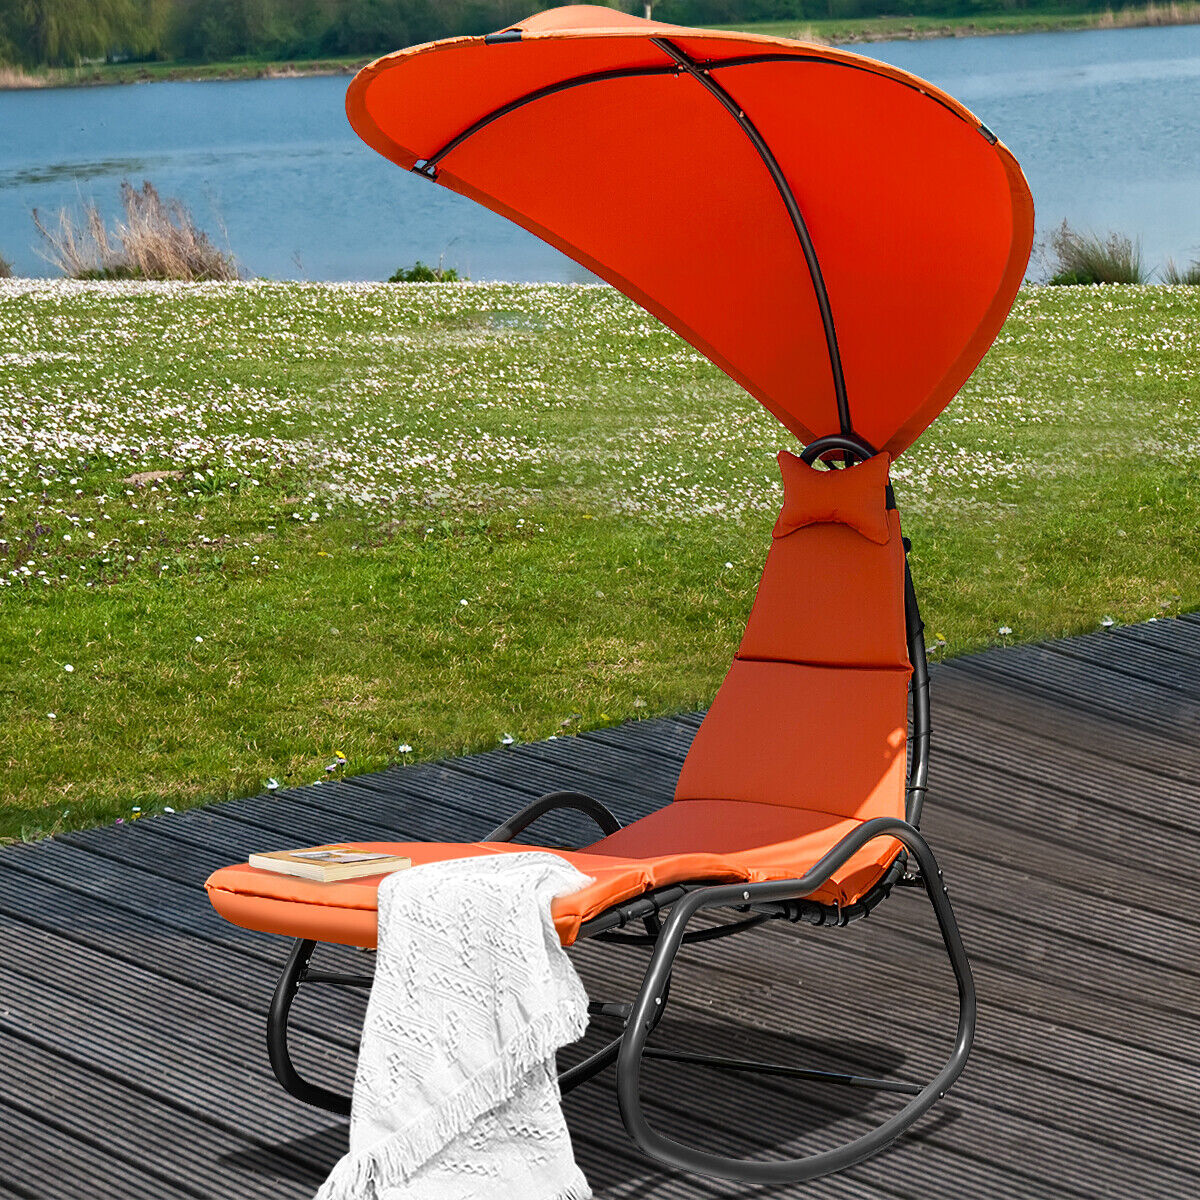 Hanging Chaise Lounge Chair Thick Cushion Patio Outdoor Furniture